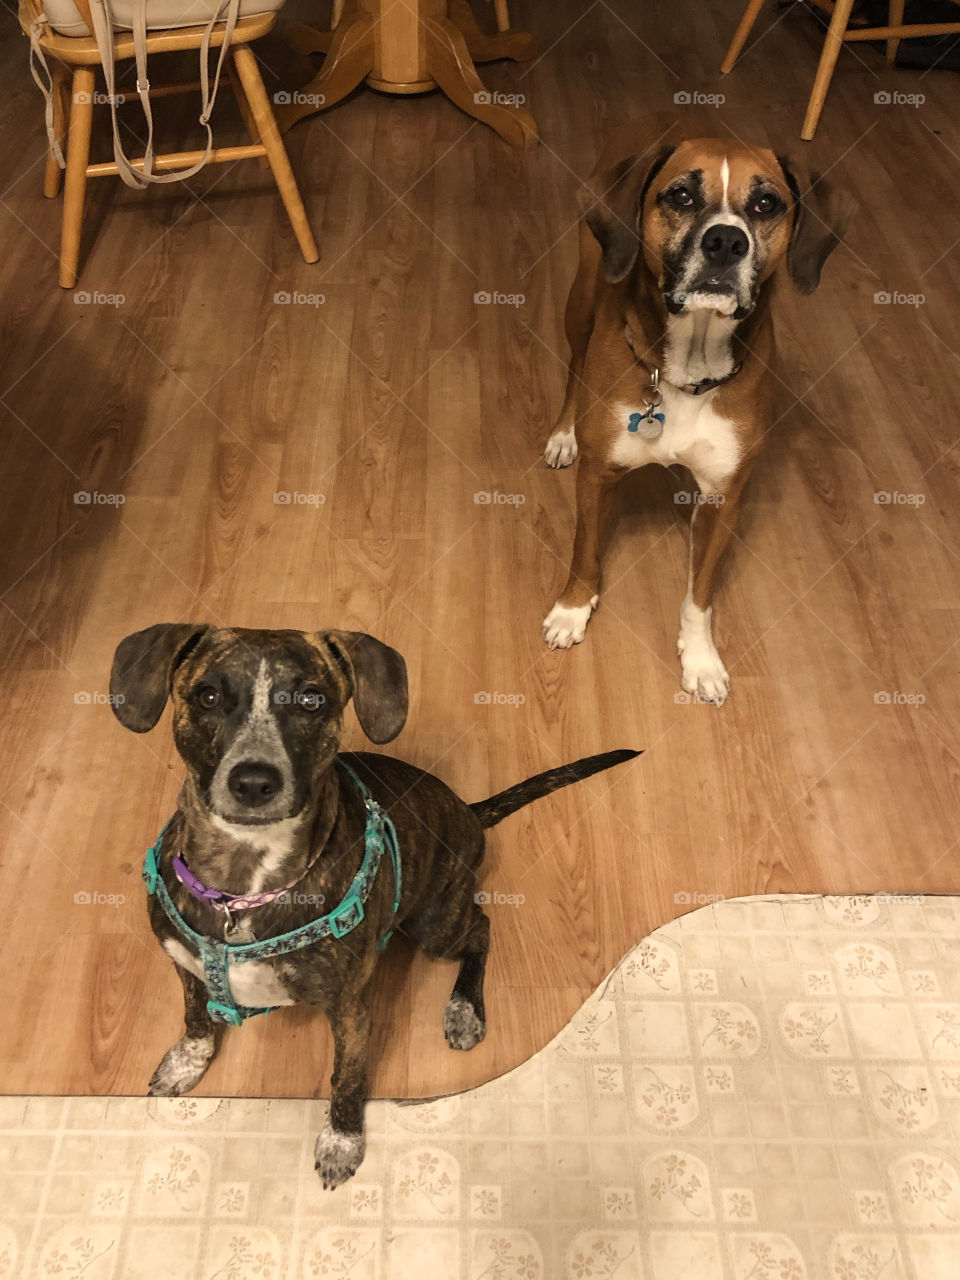 2 dogs asking-Is there something for us?